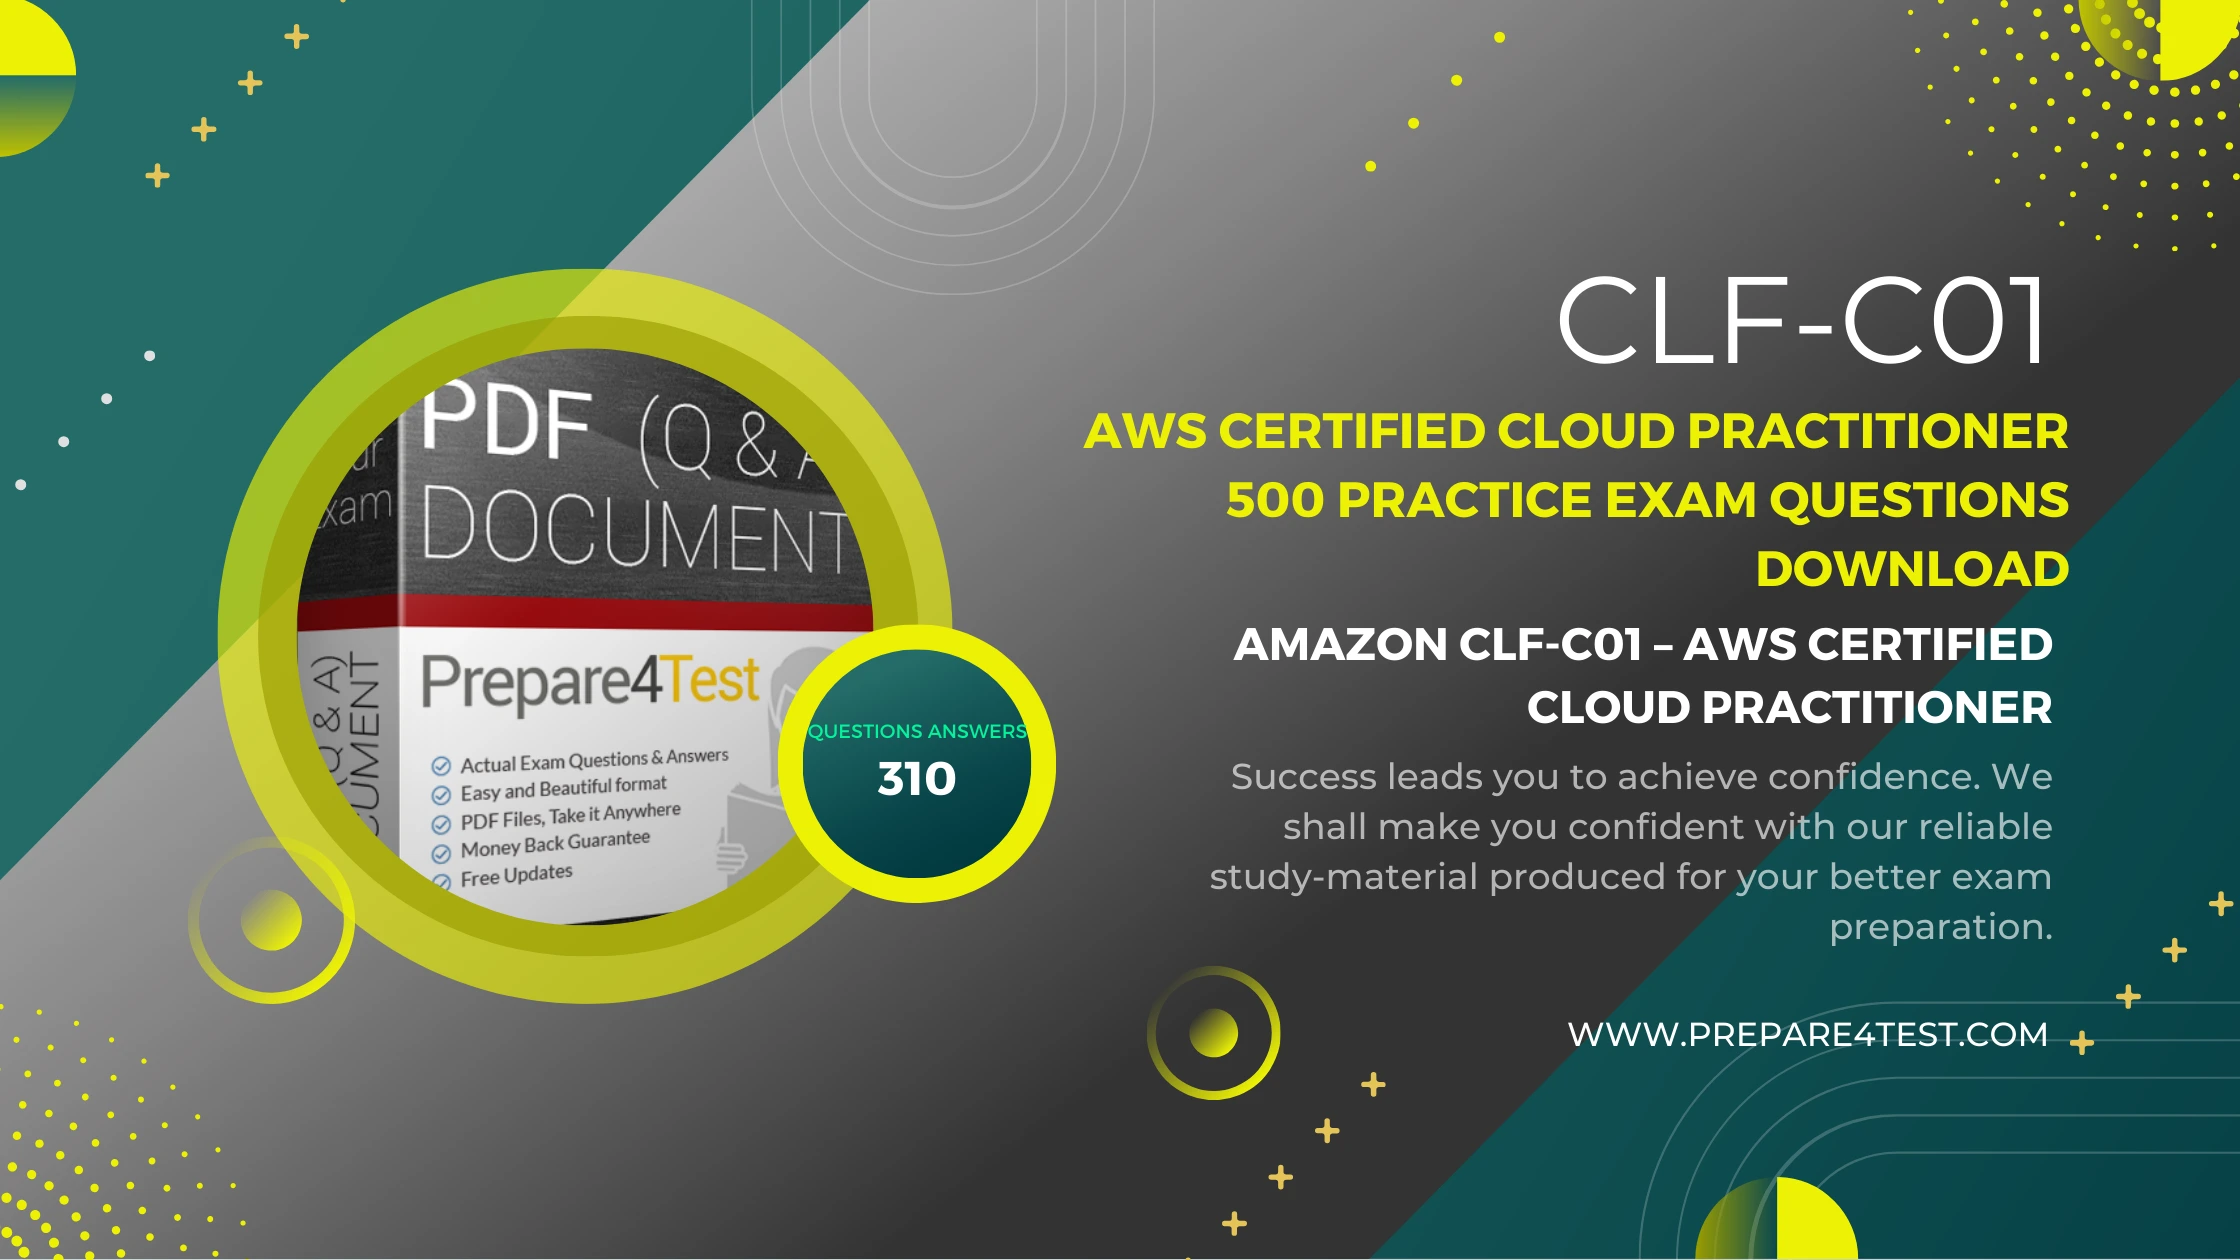 AWS Certified Cloud Practitioner 500 Practice Exam Questions Download promo code and more